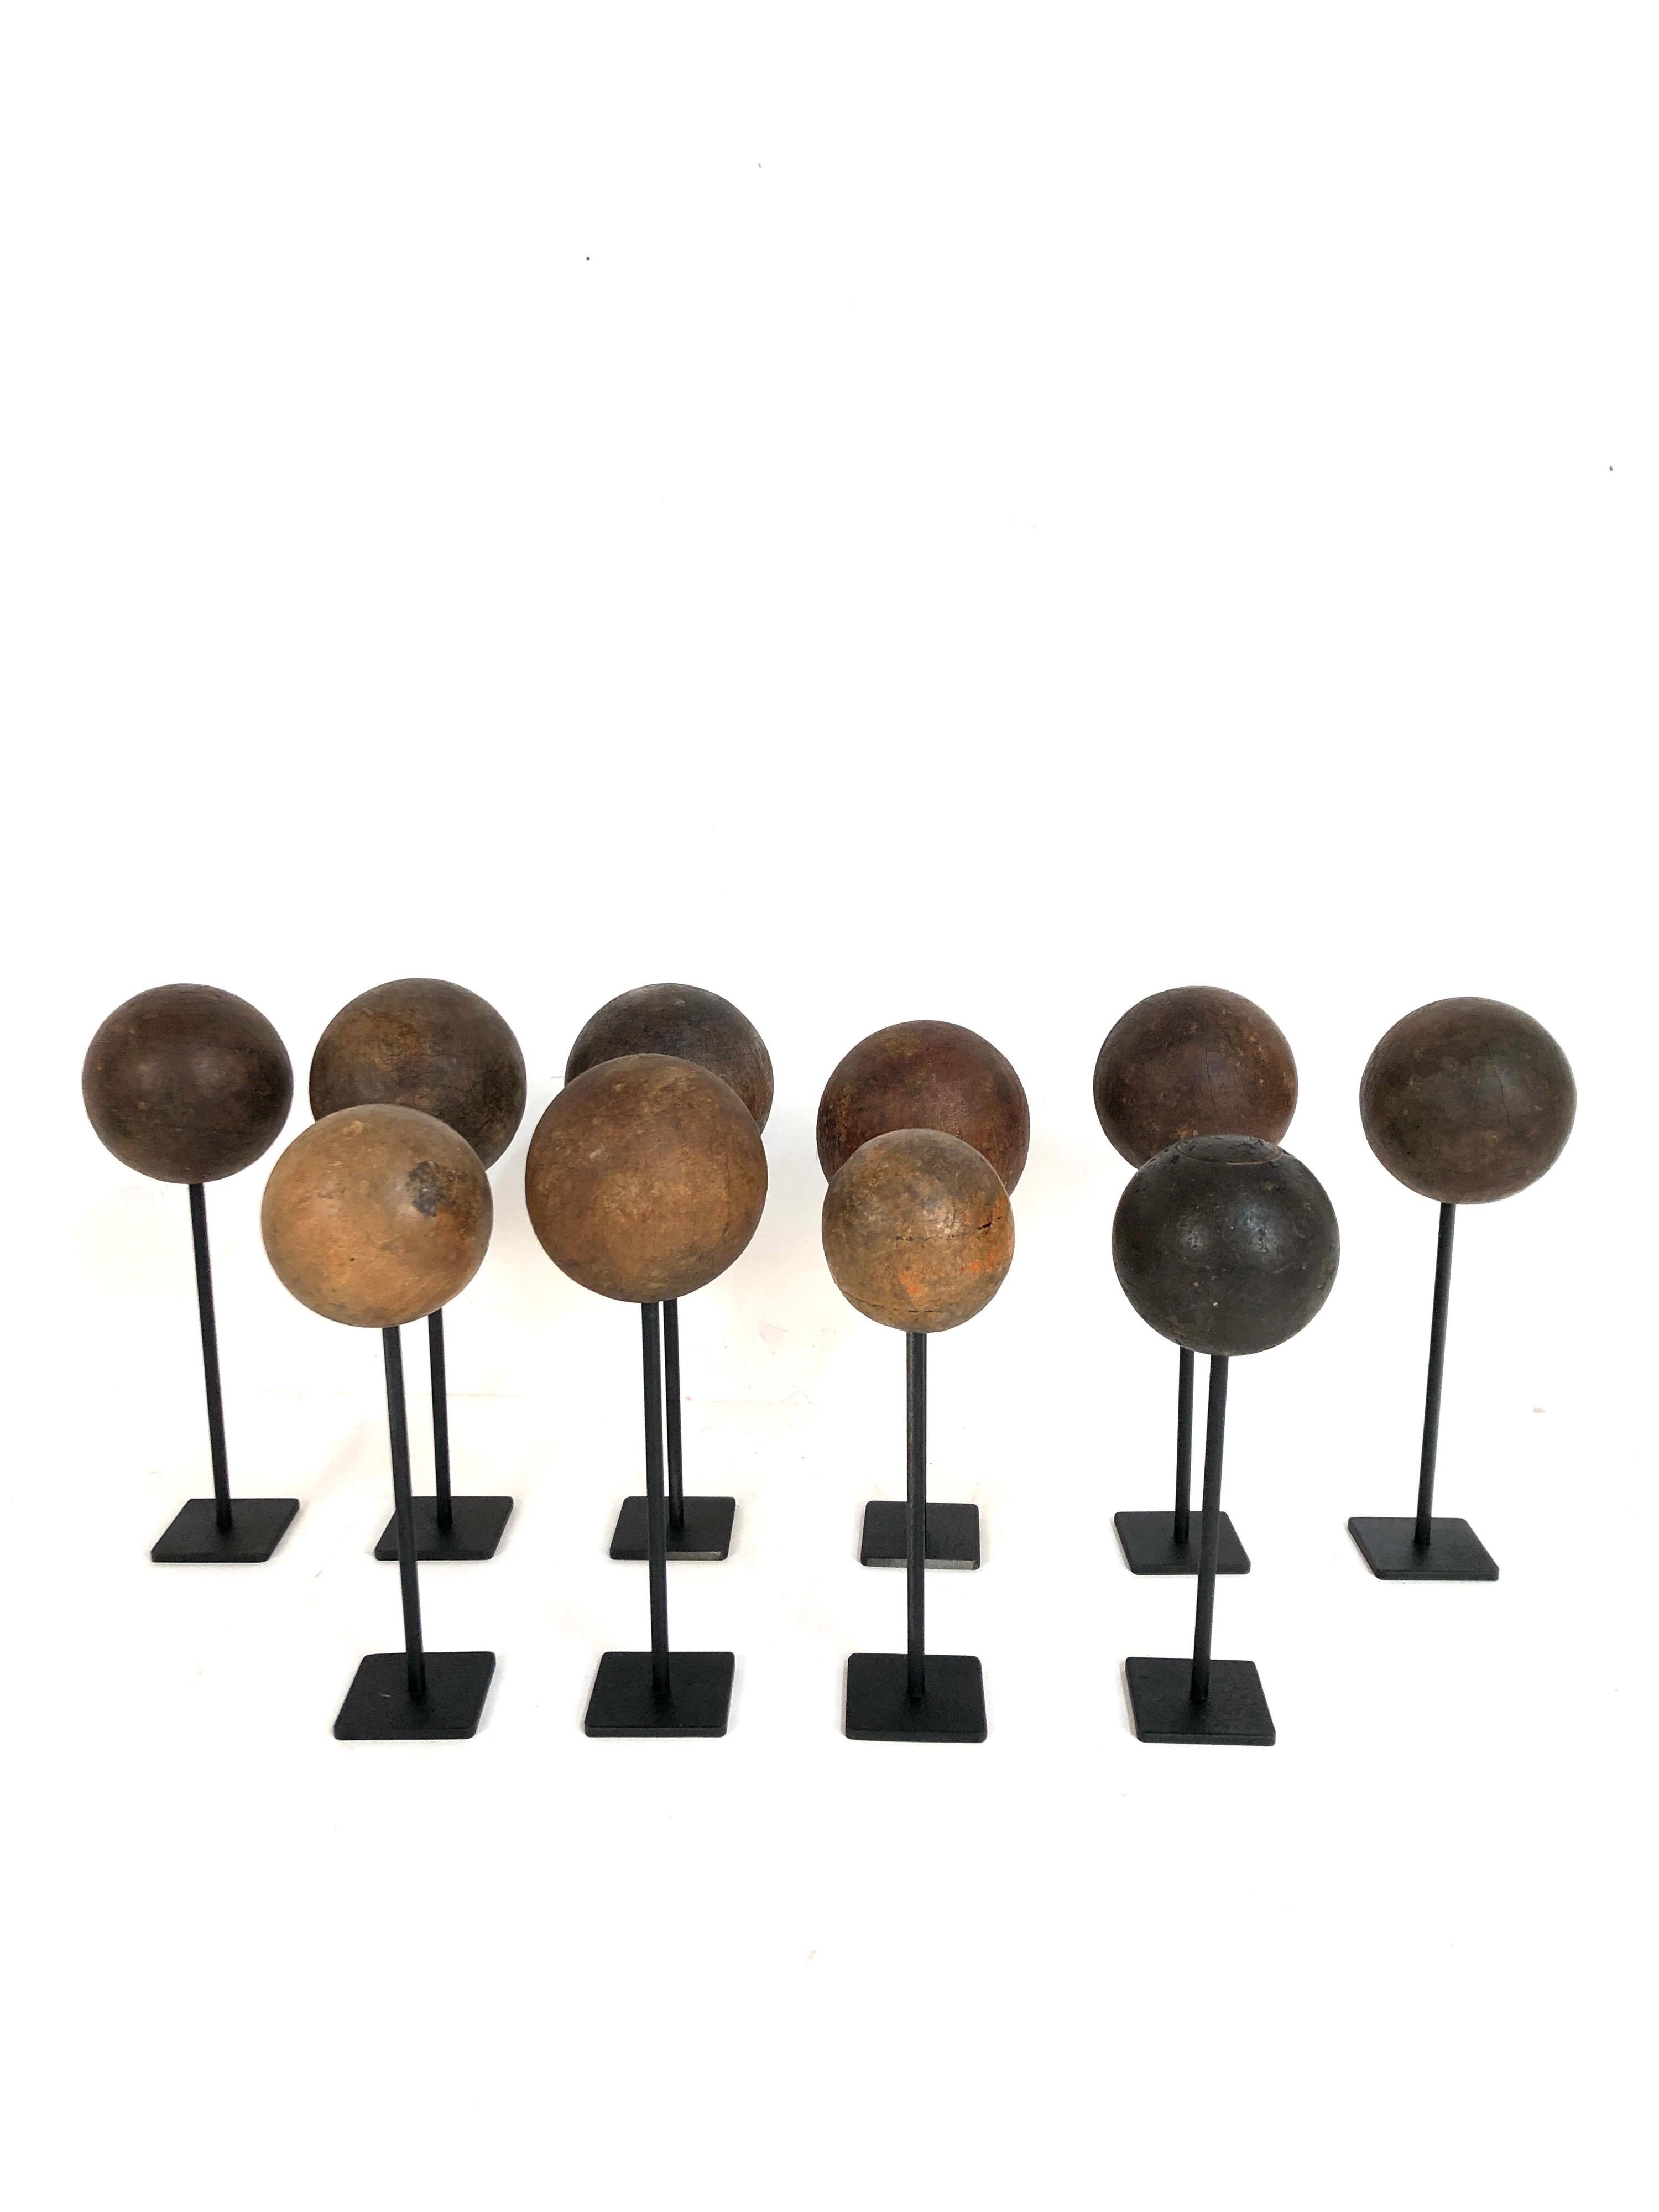 Turned Collection of 10 Custom Mounted Antique Wooden Balls